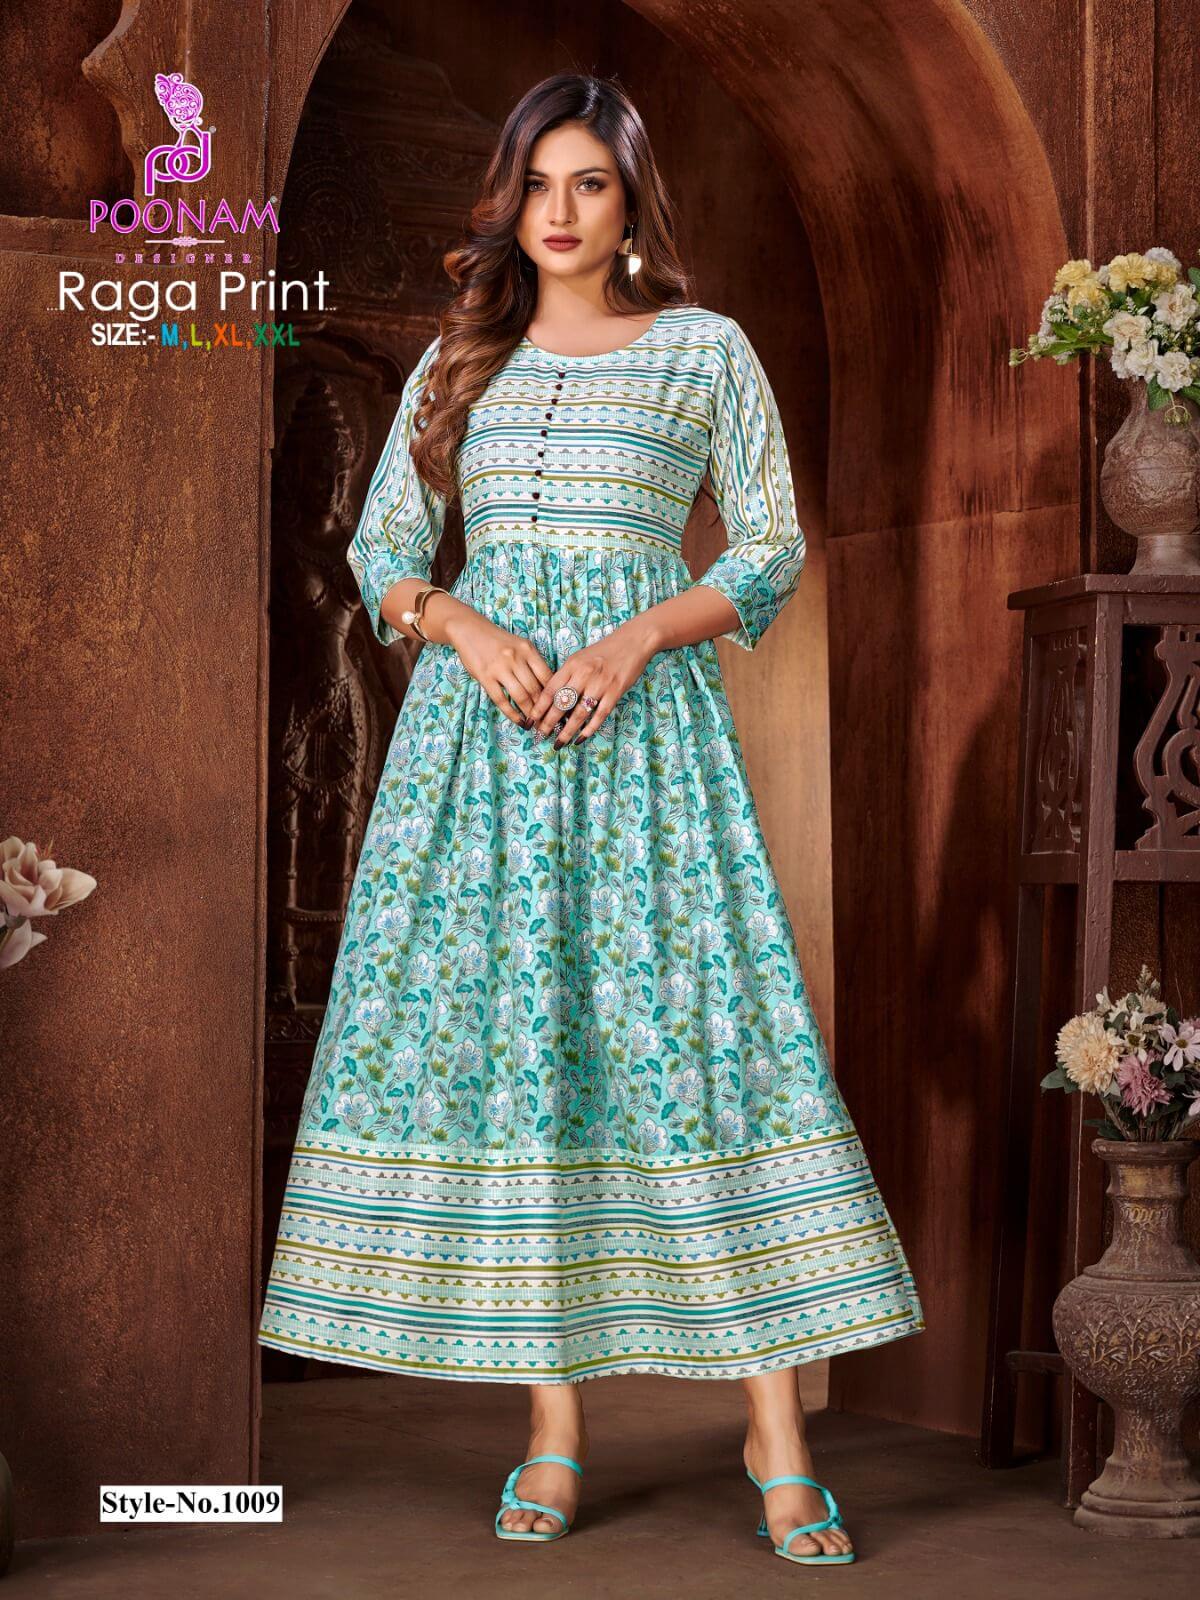 Poonam Raga Print Gowns Catalog collection 4